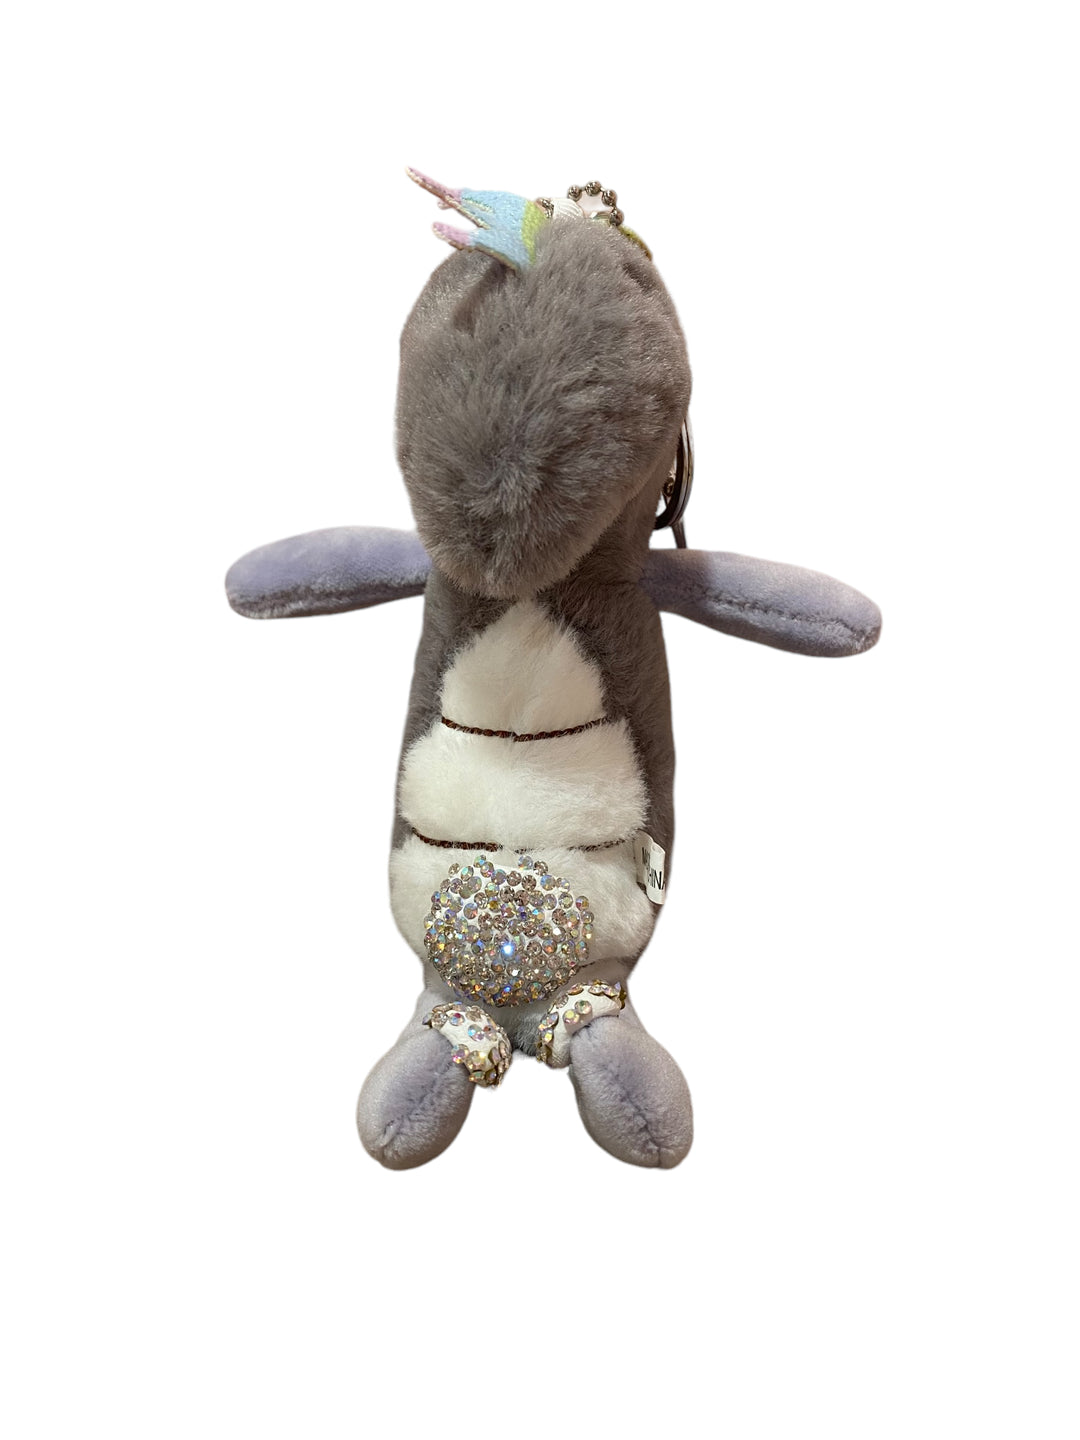 PLUSH ANIMAL KEY CHAIN - Kingfisher Road - Online Boutique